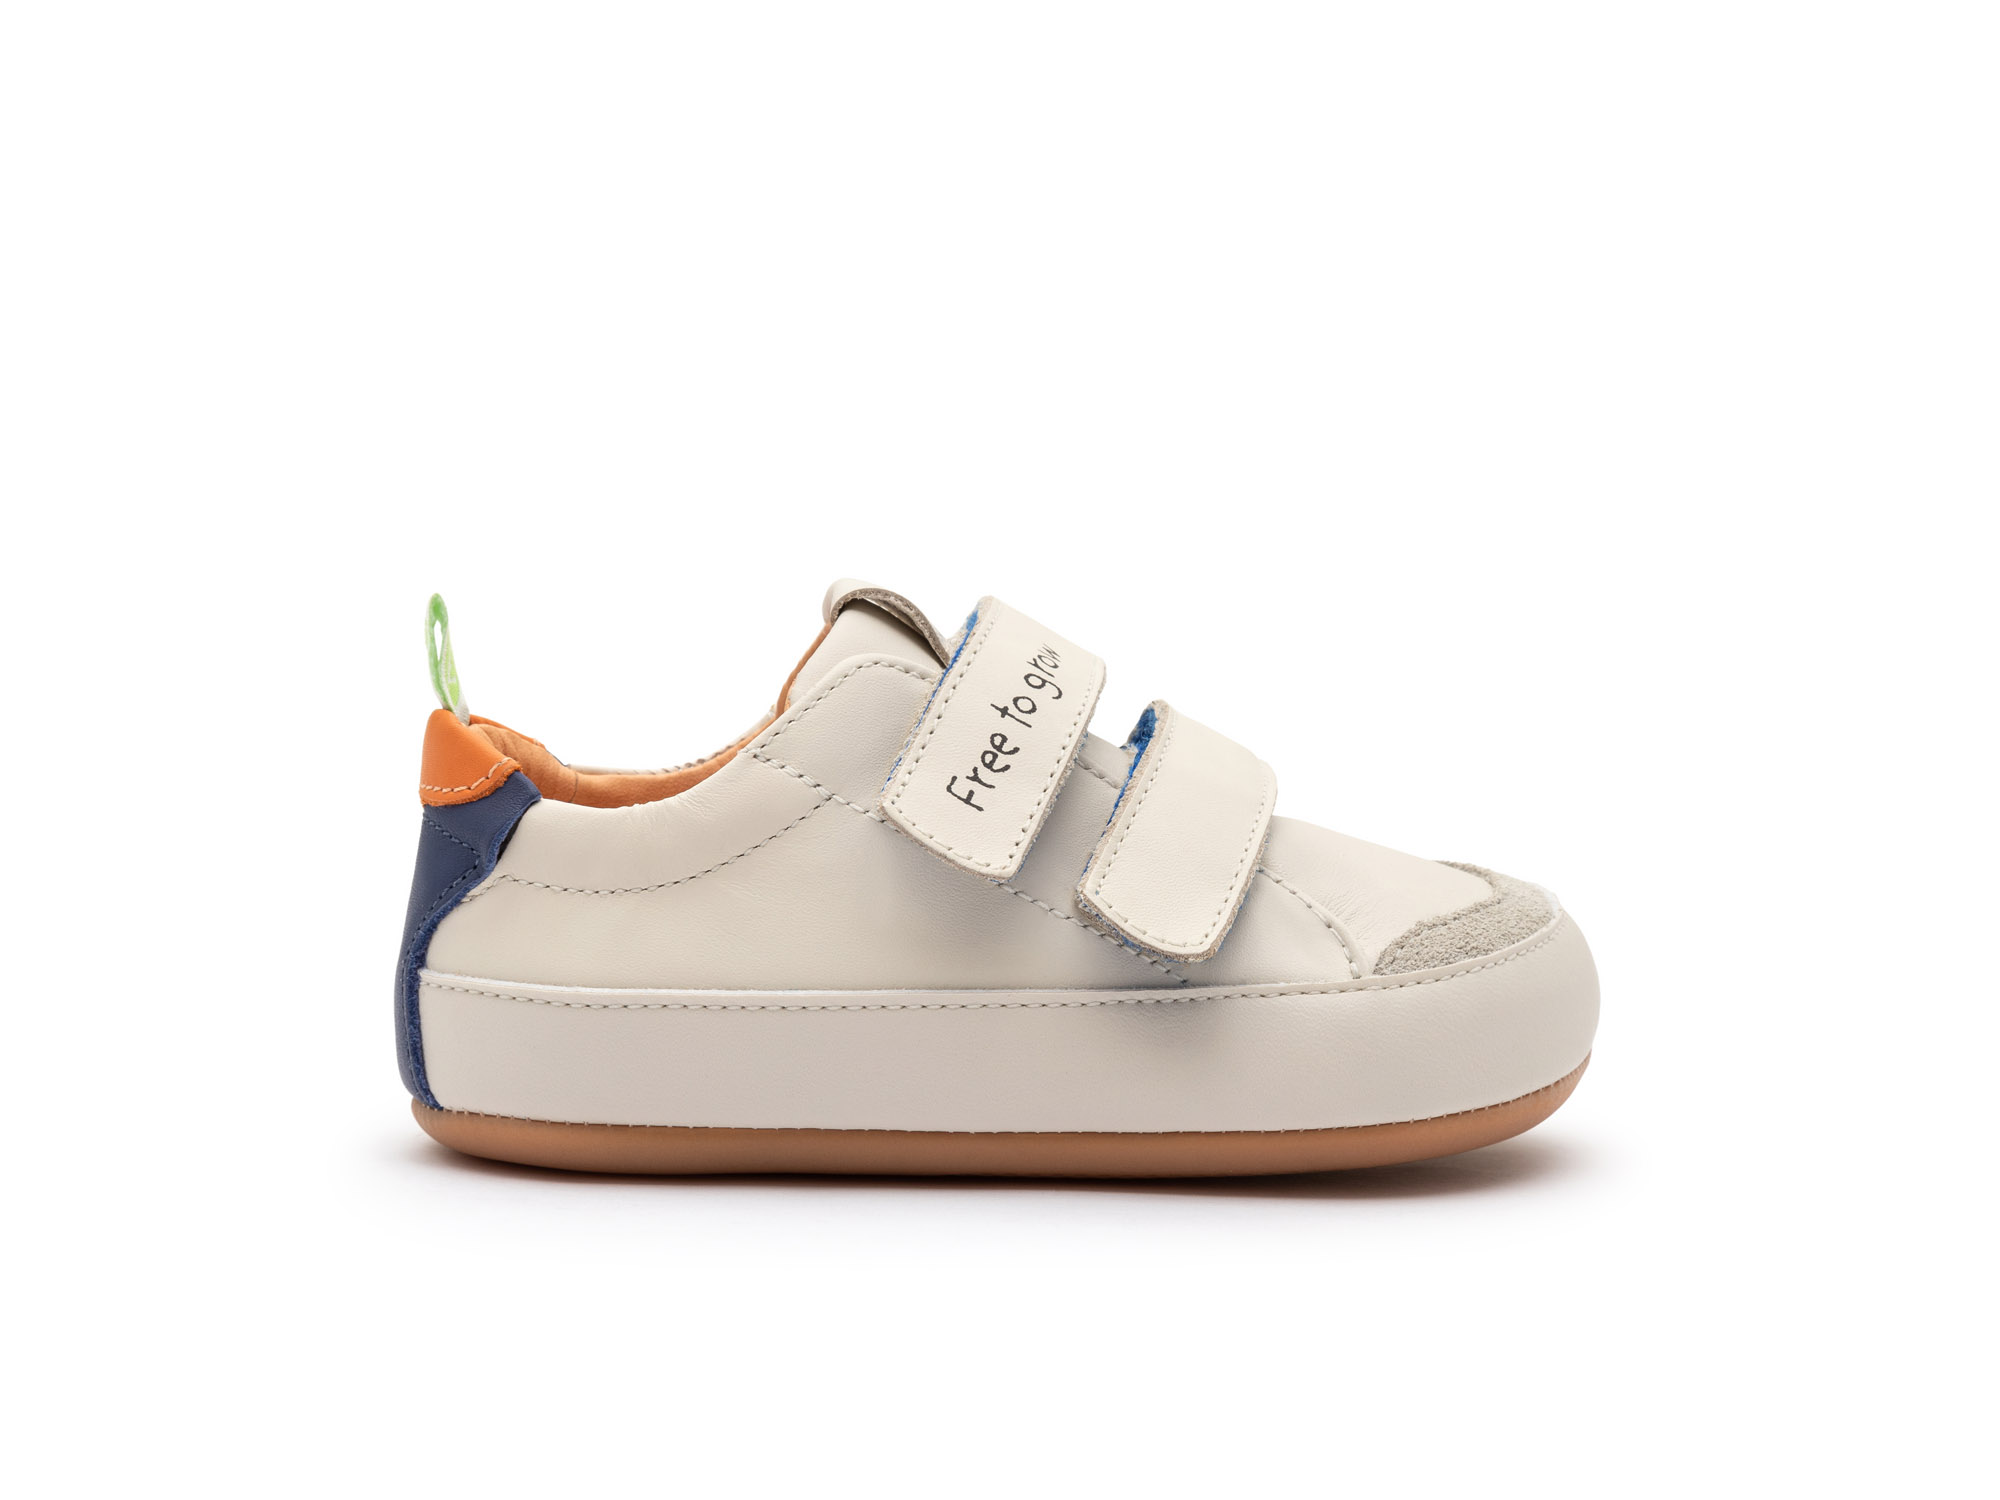 UP & GO Sneakers for Boys Bossy Play | Tip Toey Joey - Australia - 4